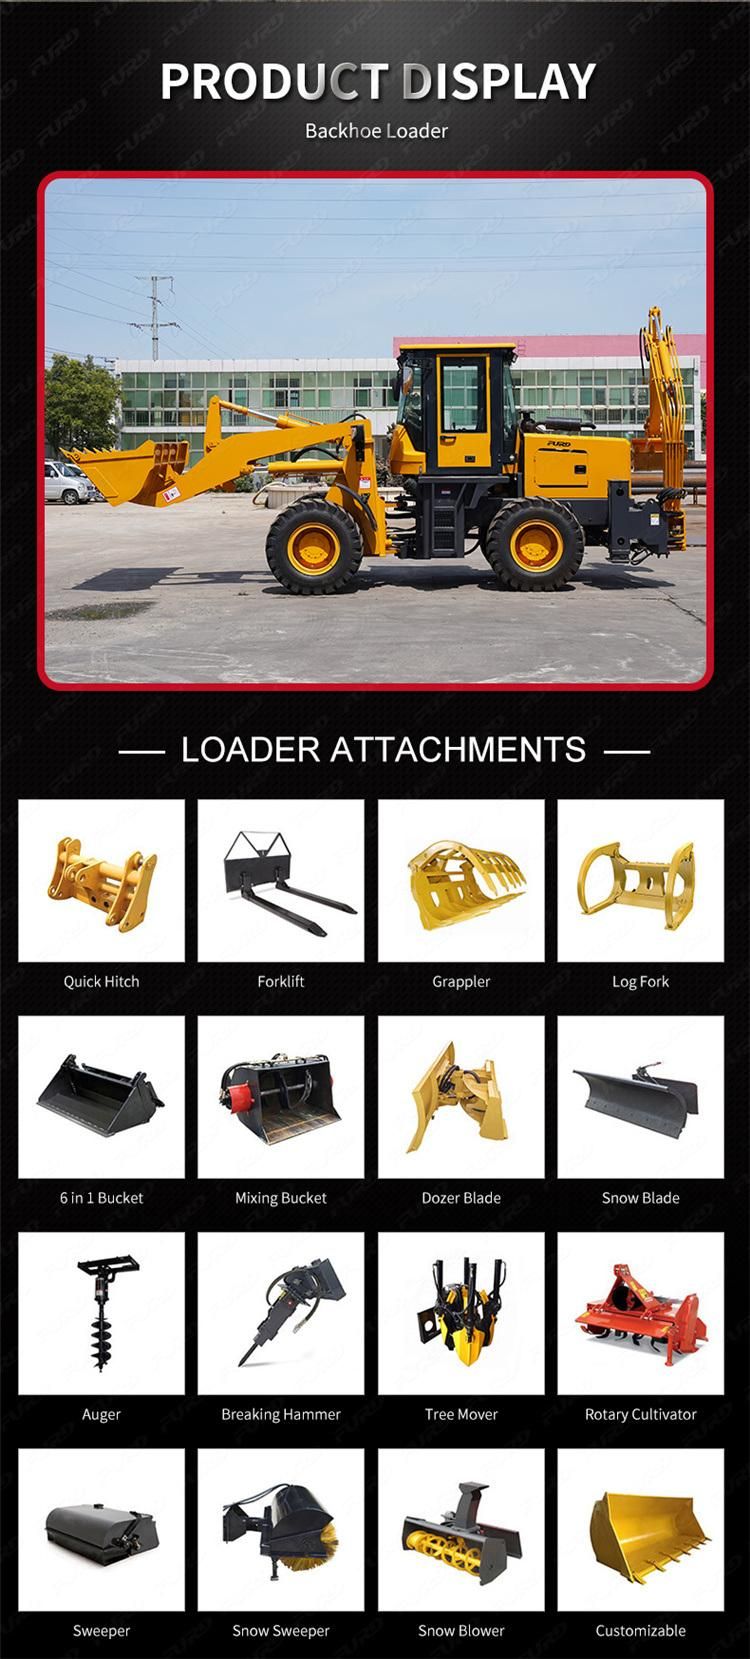 4 Wheel Drive New Mini Backhoe Loader with Cheap Price